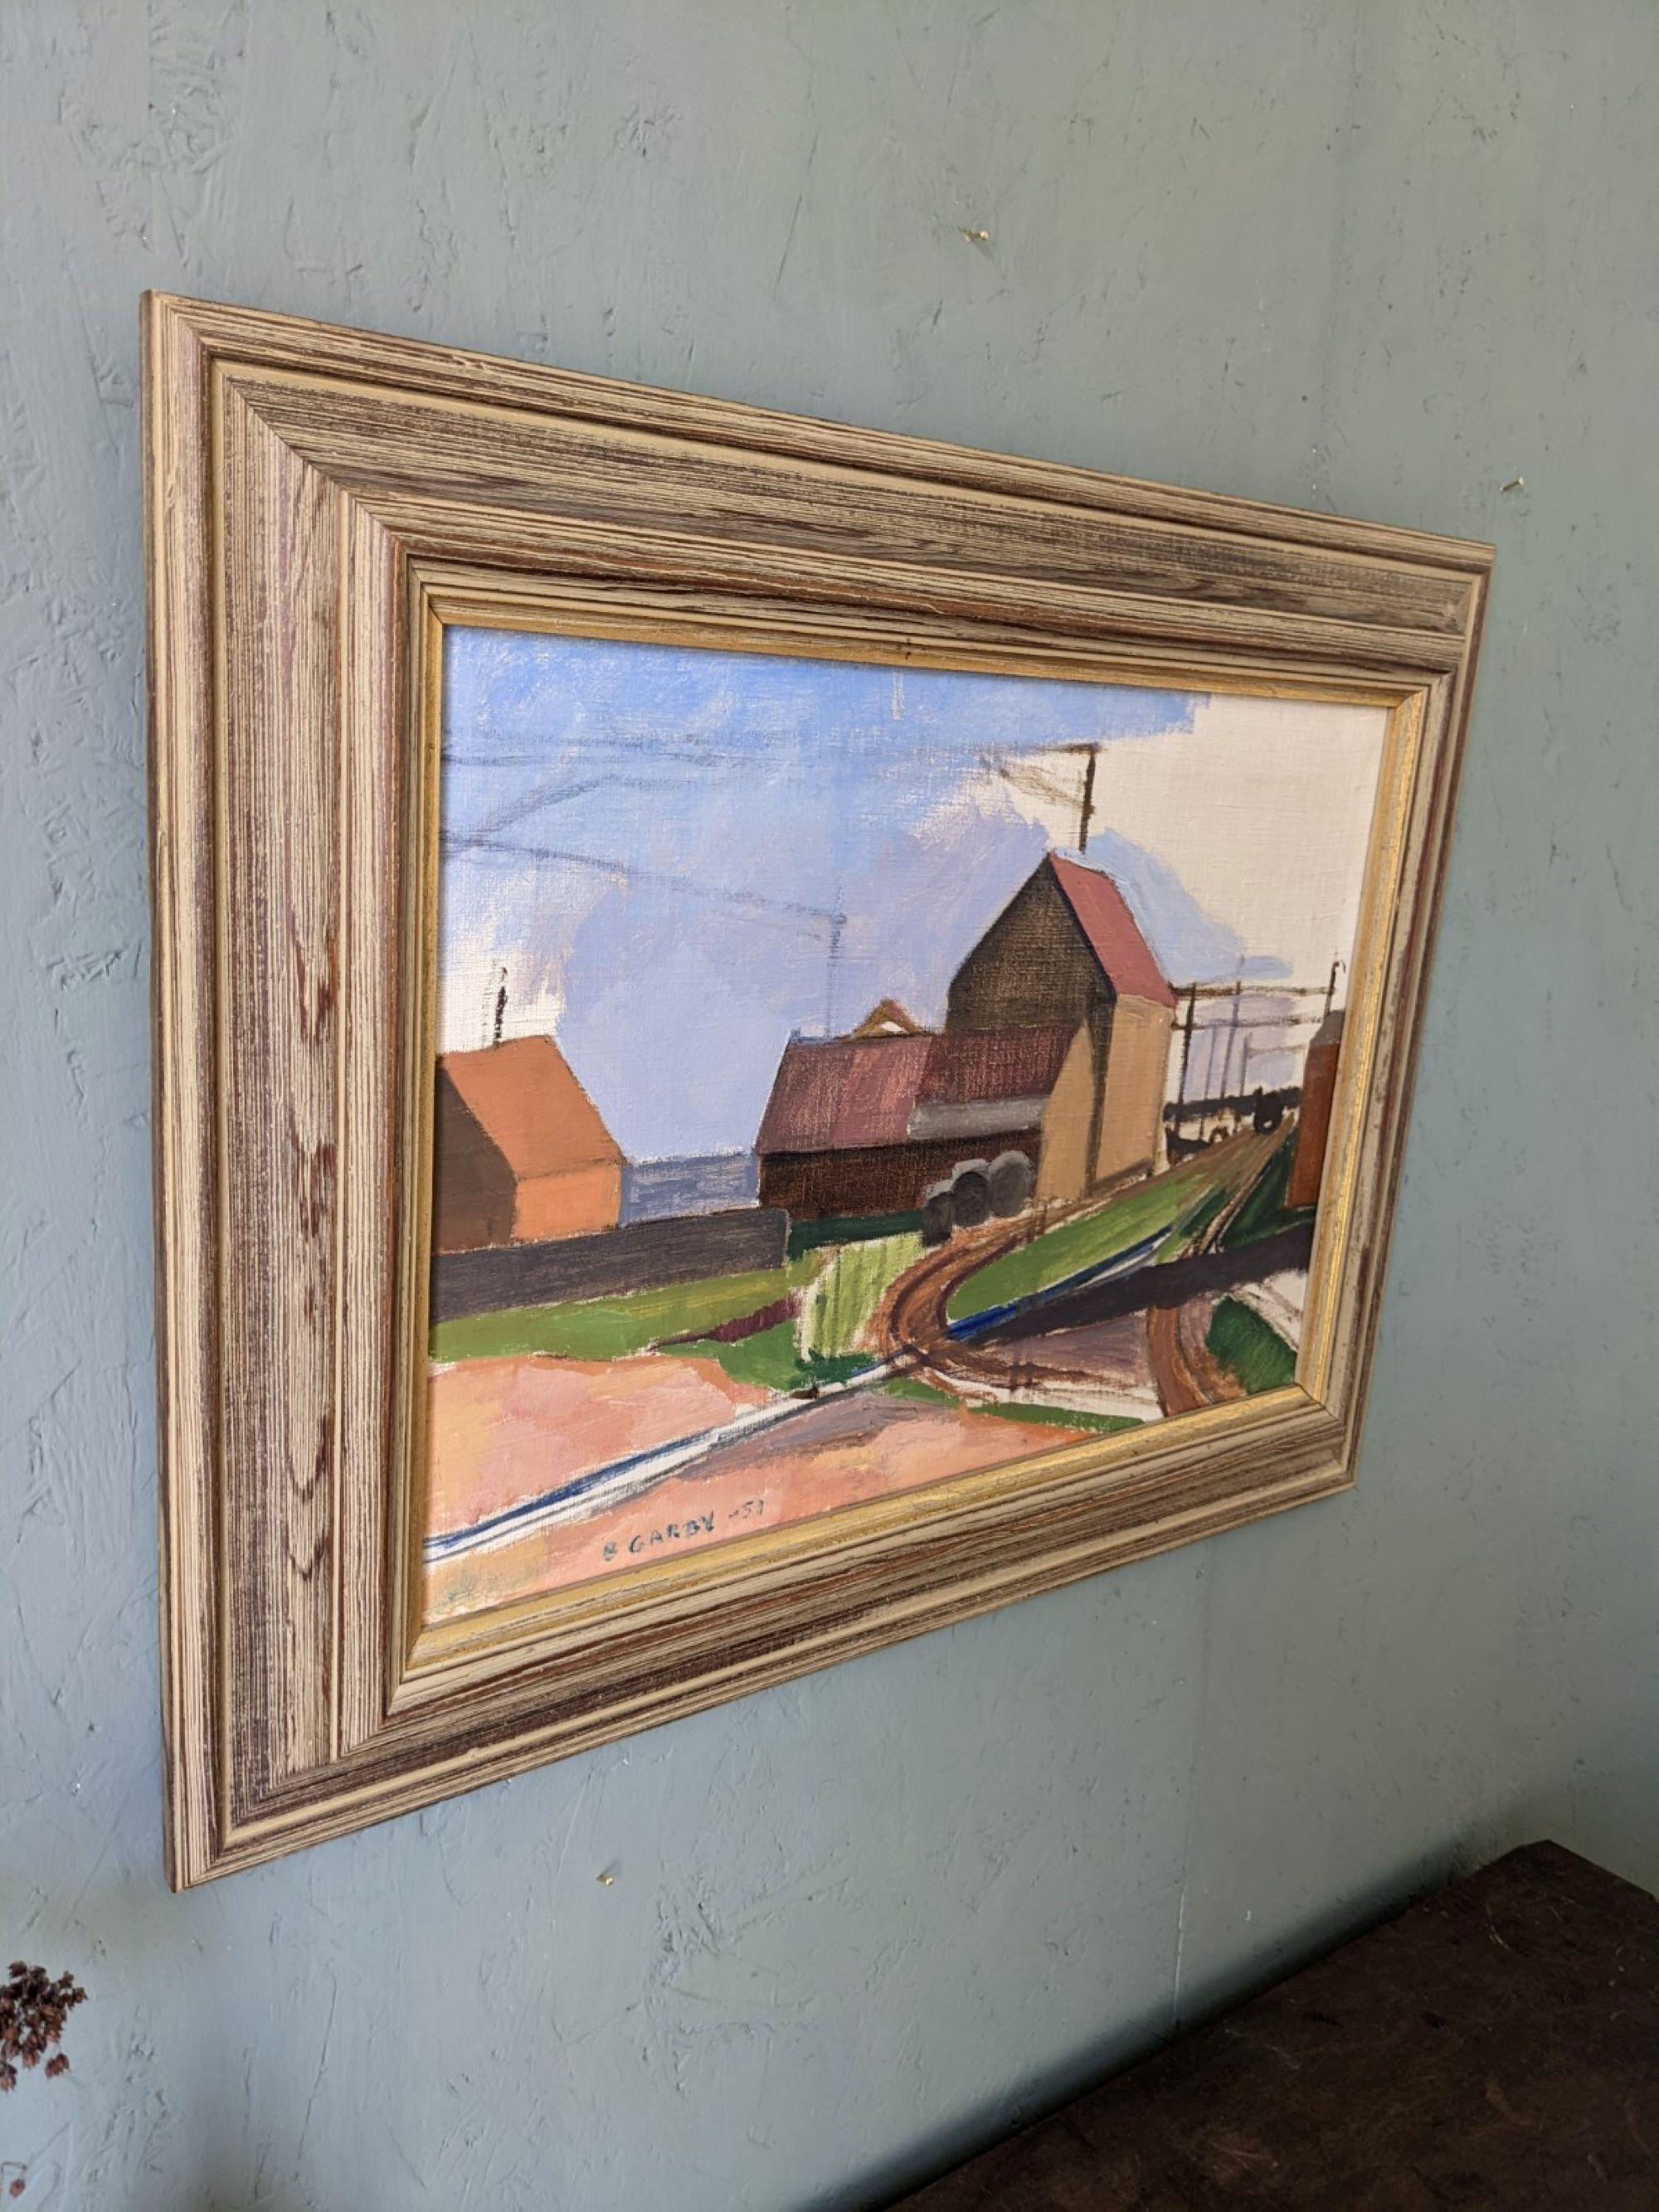 SUBURBAN SERENADE
Size: 46 x 59 cm (including frame)
Oil on canvas

An uplifting modernist composition, executed in oil onto canvas and dated 1951.

The artwork portrays a suburban landscape adorned with blocks of buildings, winding roads and